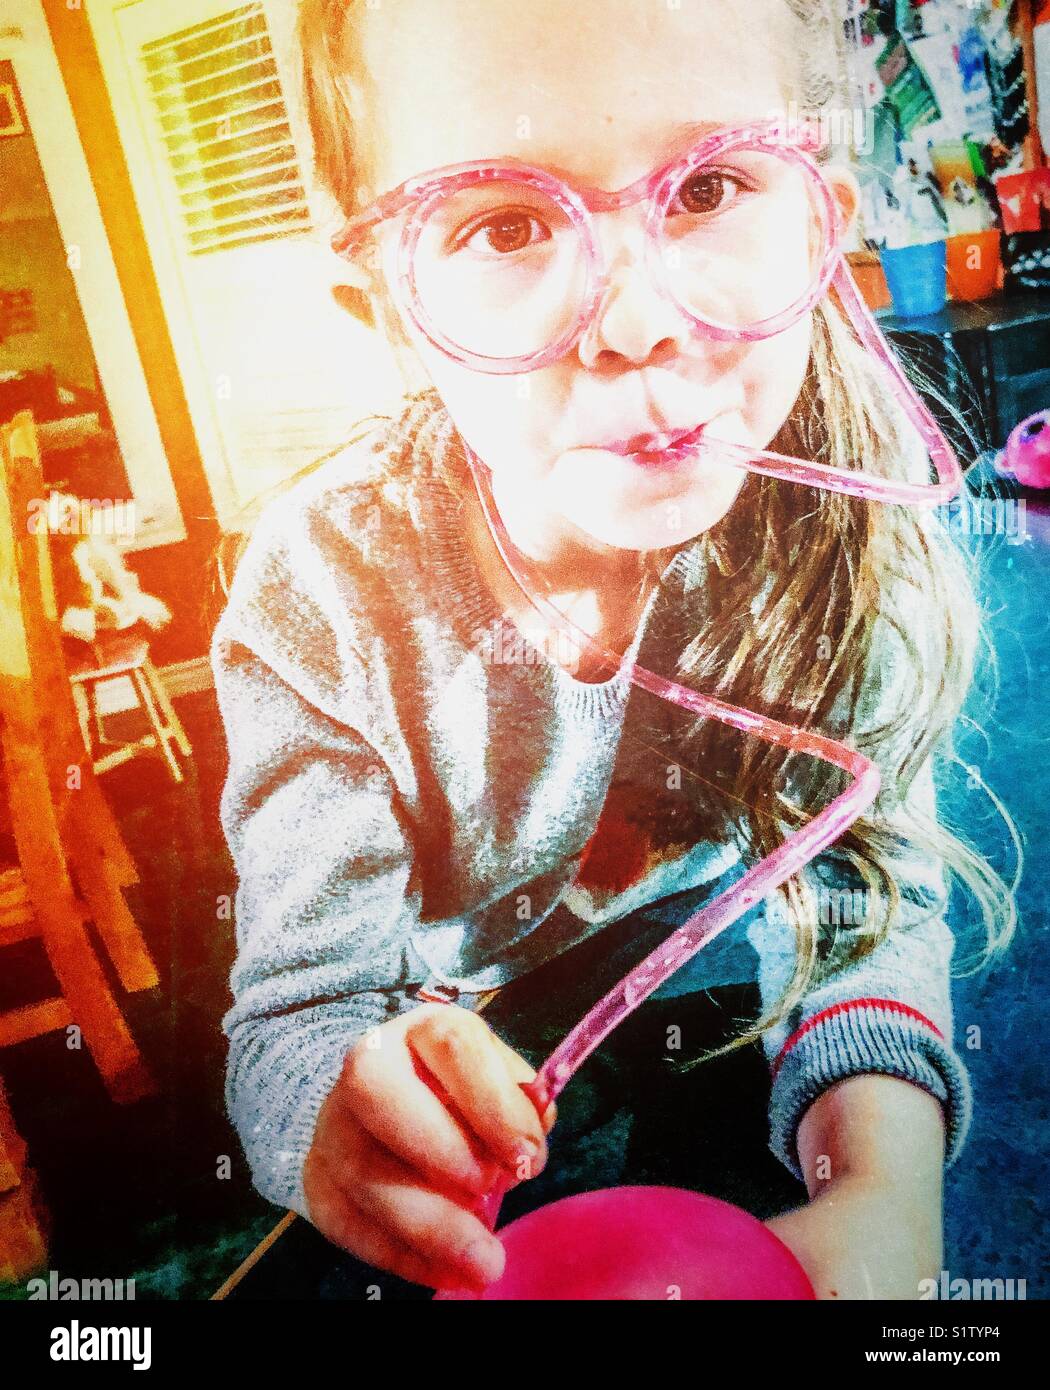 https://c8.alamy.com/comp/S1TYP4/5-year-old-girl-drinking-water-with-a-curly-crazy-pink-straw-that-S1TYP4.jpg